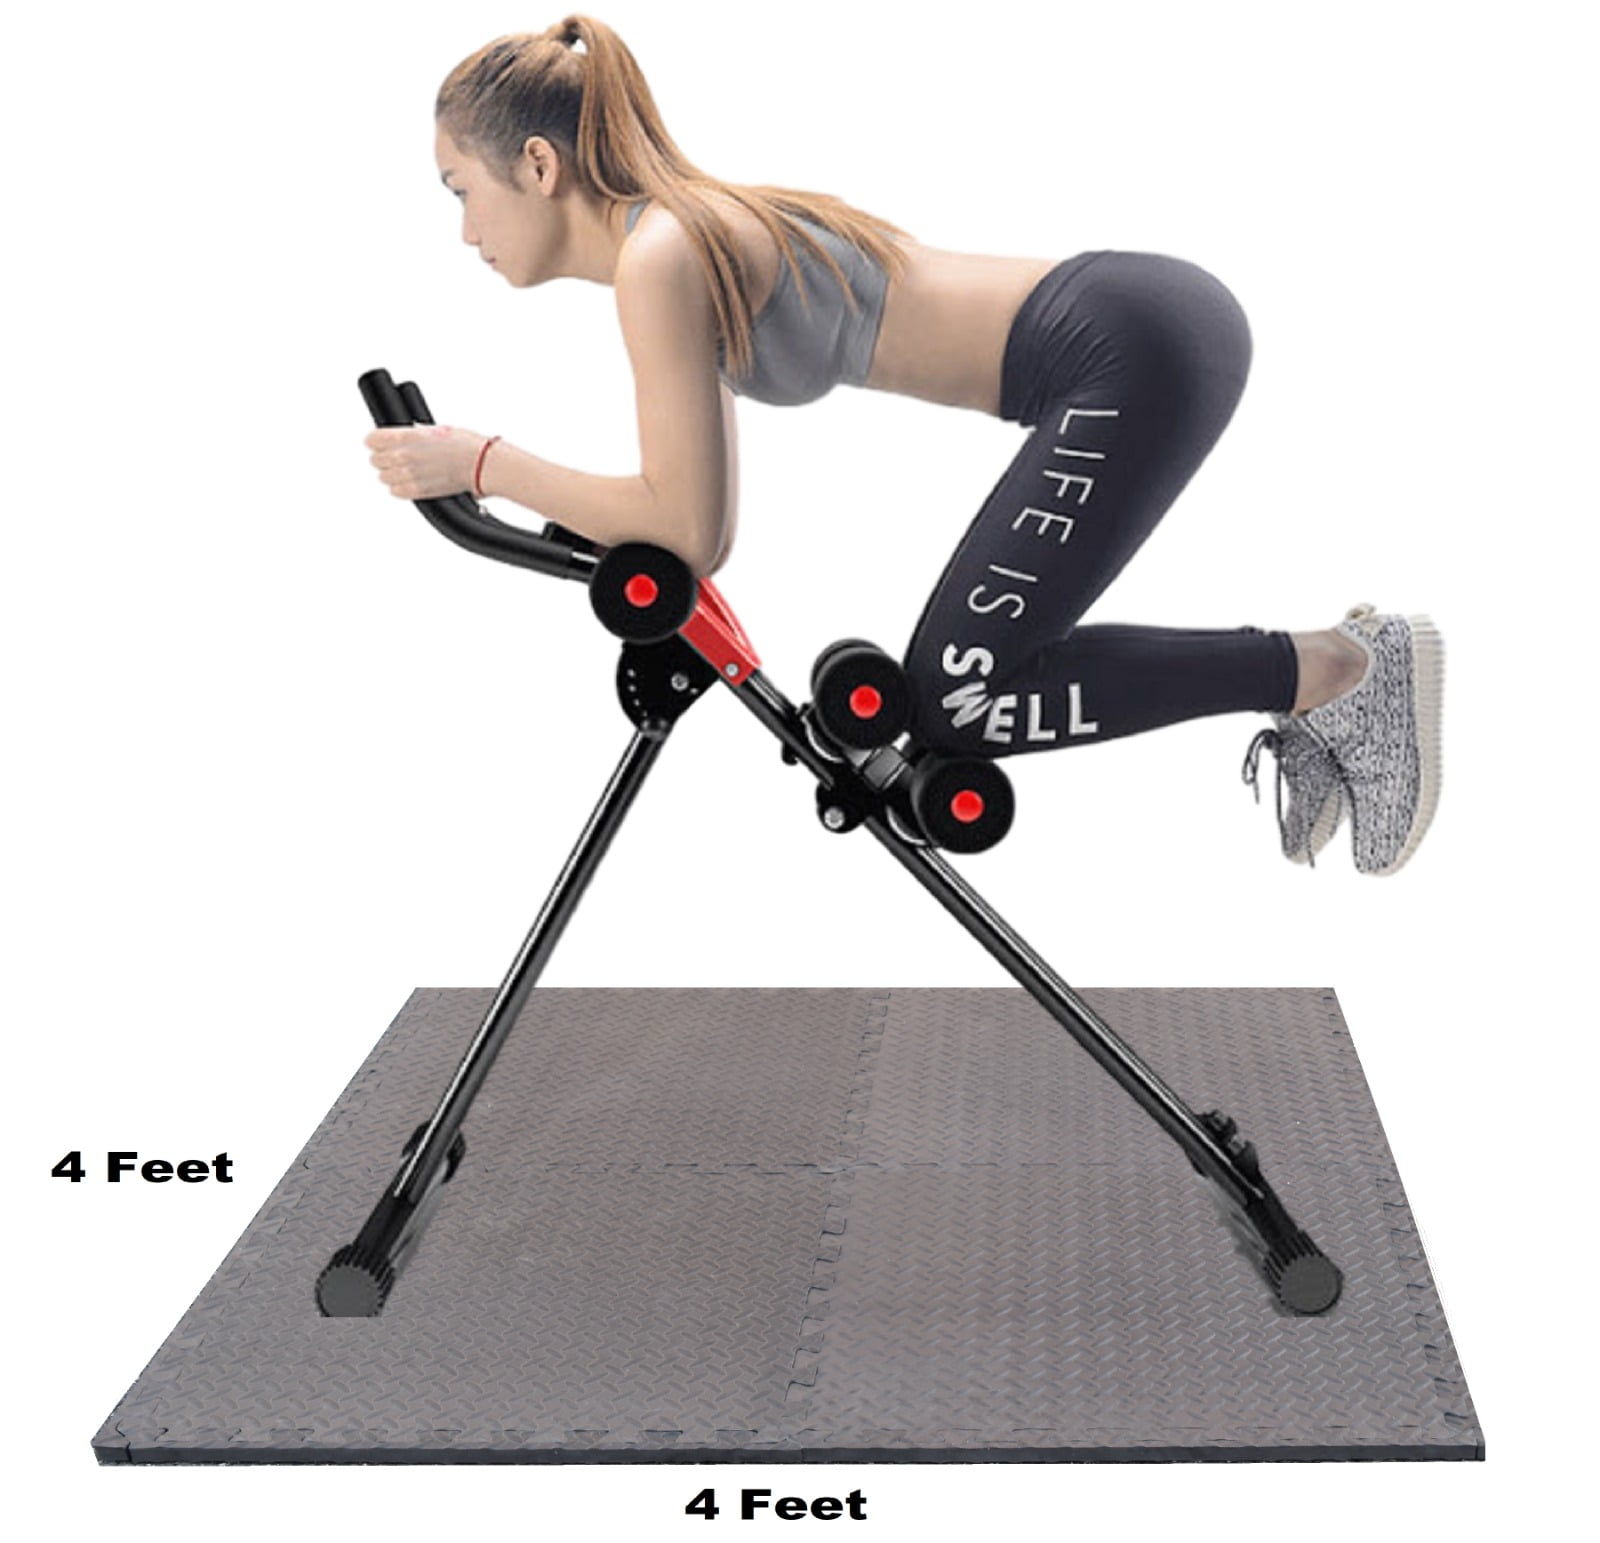 Details about   Home Abdominal Trainer Crunch Machine&Sit Up Bench Core Fitness Gym Exercise ❉❉❉ 